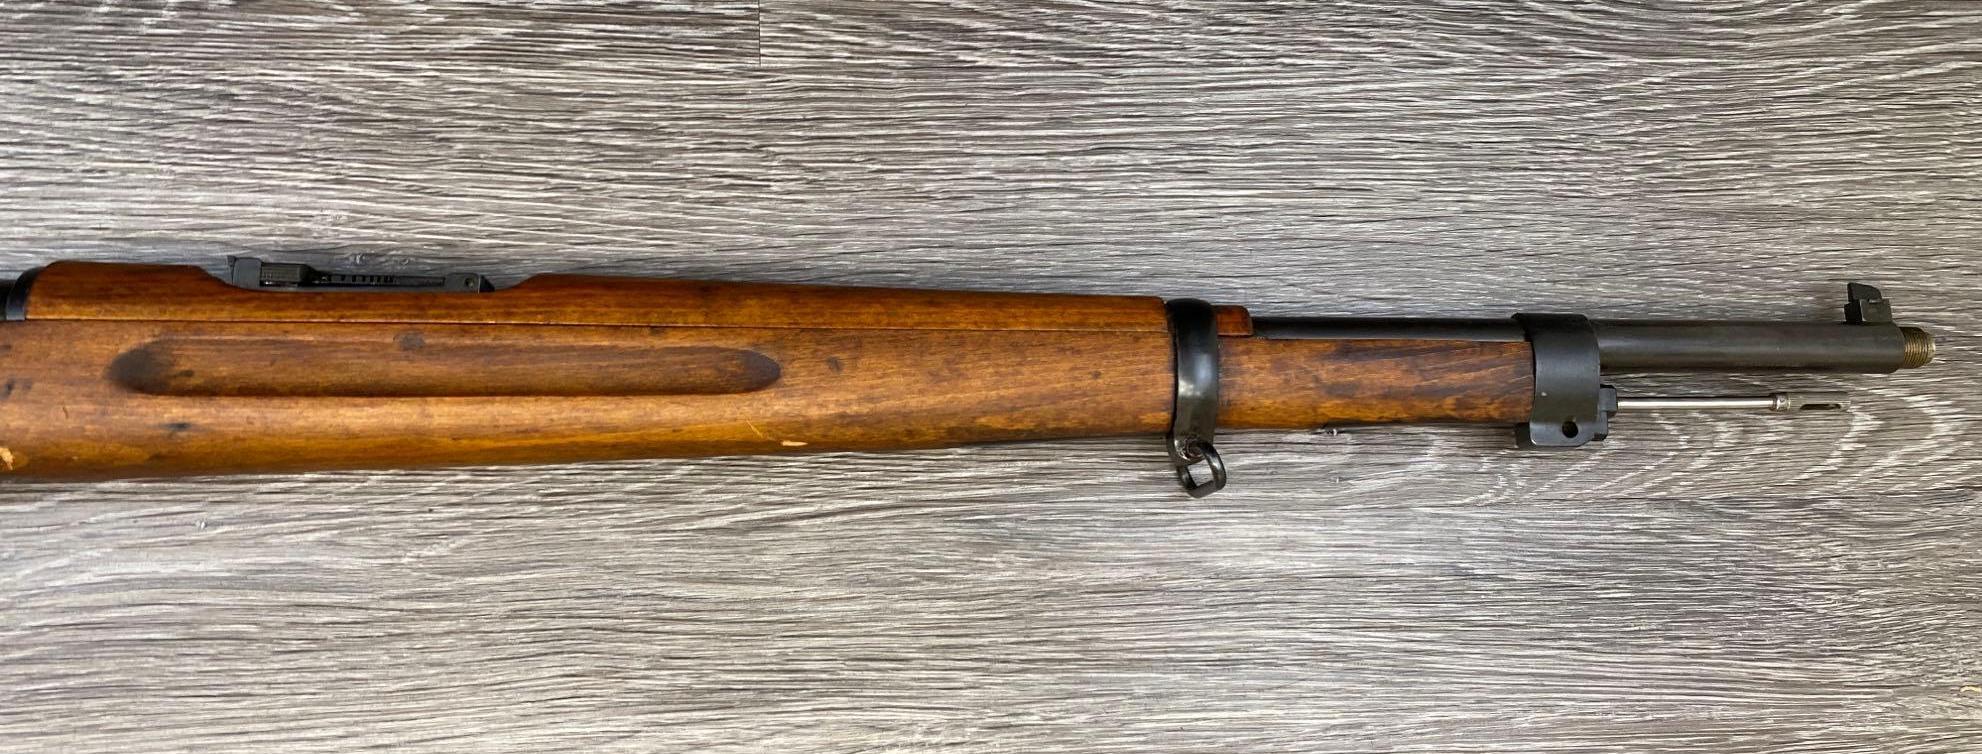 M38 SWEDISH MAUSER 6.5x55mm CAL. by HUSQVARNA and WWII DATED 1943